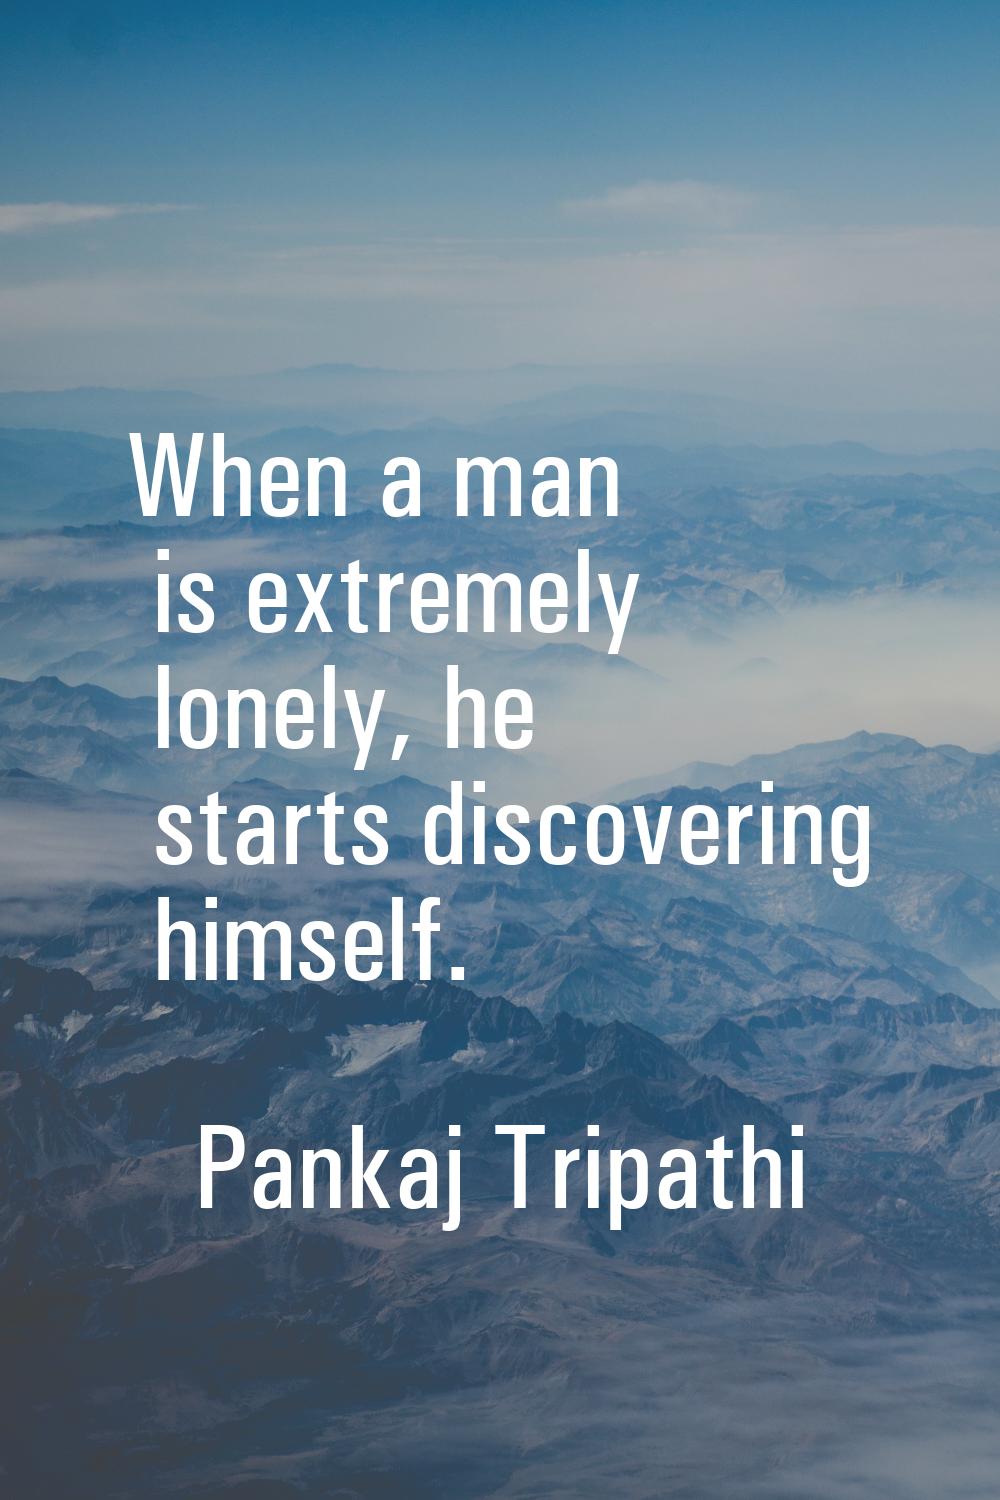 When a man is extremely lonely, he starts discovering himself.